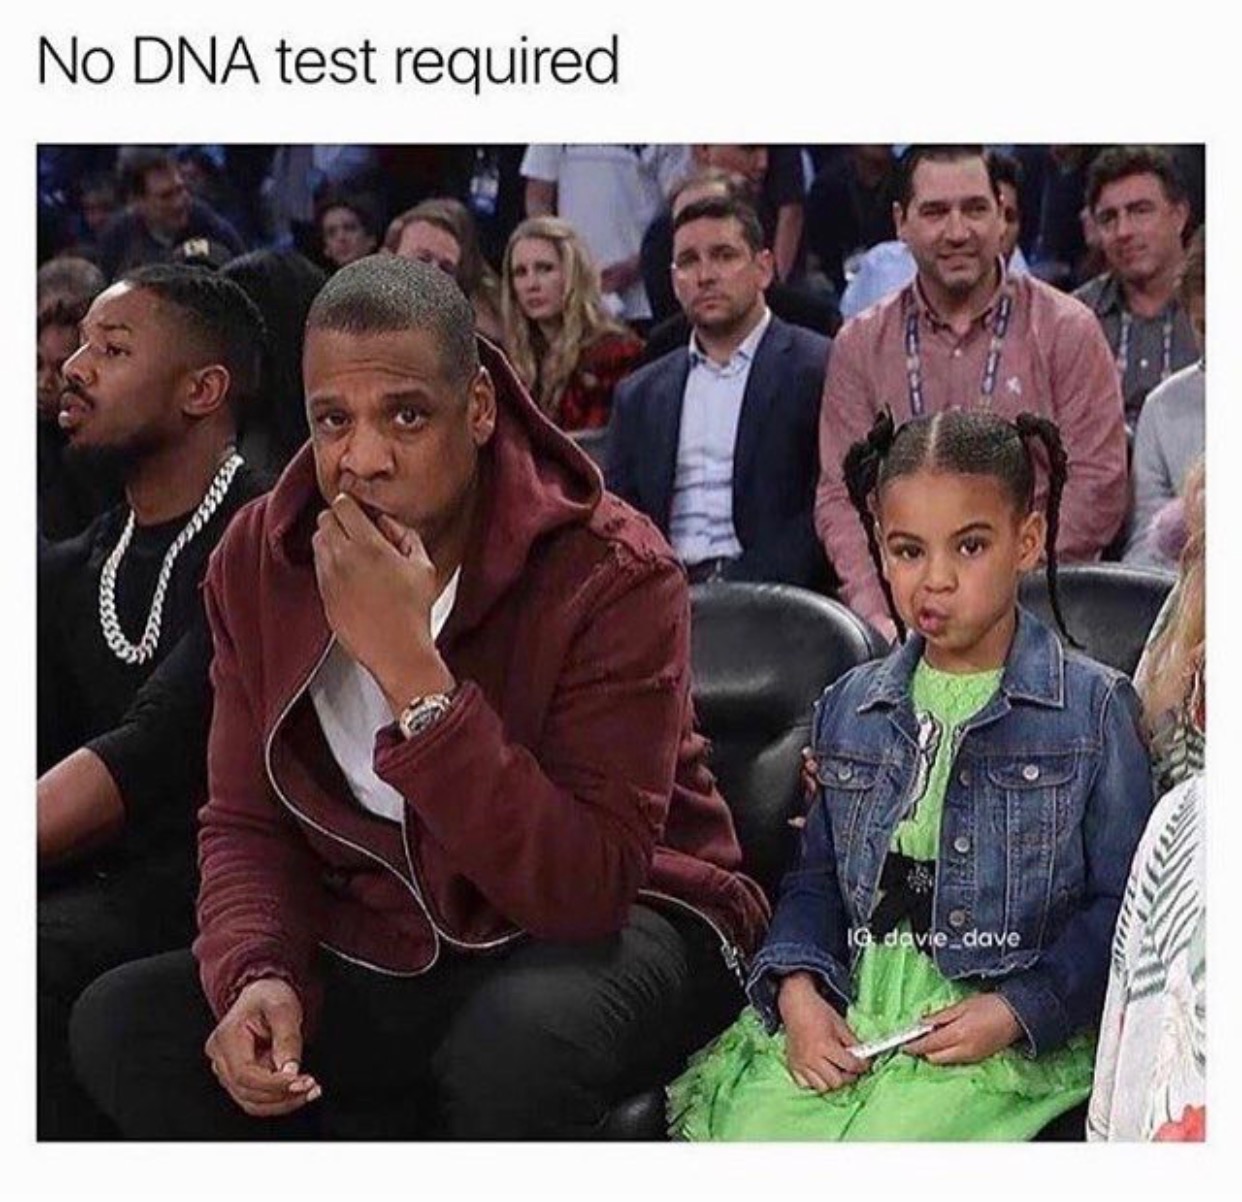 young beyonce and jay z - No Dna test required Gdavie_dave